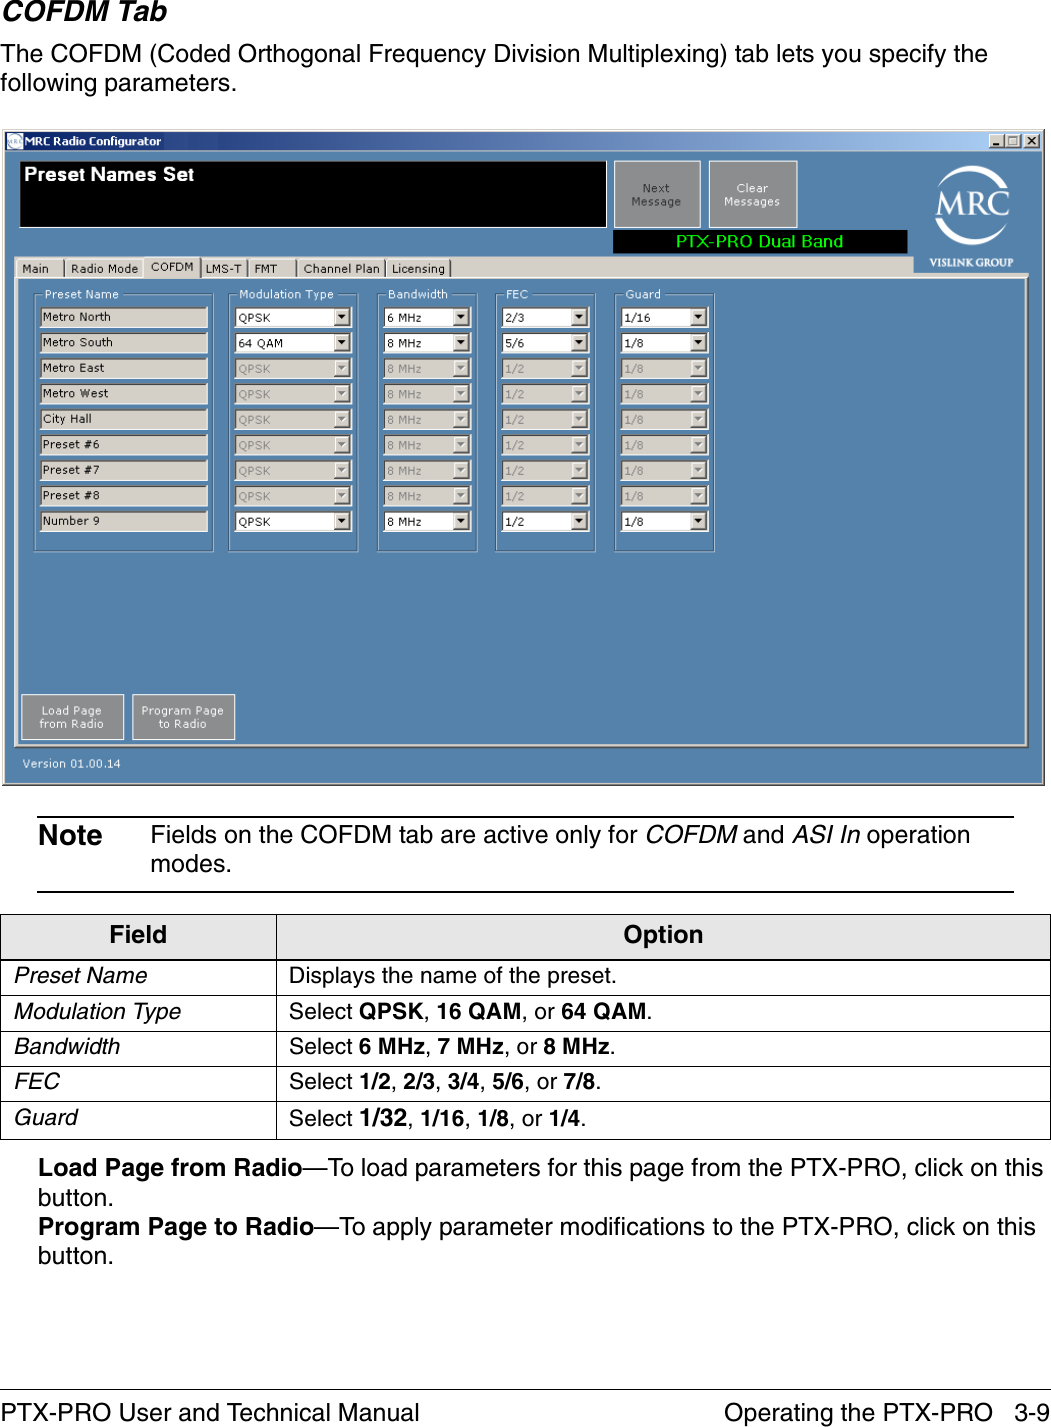 Operating the PTX-PRO   3-9PTX-PRO User and Technical ManualCOFDM TabThe COFDM (Coded Orthogonal Frequency Division Multiplexing) tab lets you specify the following parameters. Note Fields on the COFDM tab are active only for COFDM and ASI In operation modes.Load Page from Radio—To load parameters for this page from the PTX-PRO, click on this button.Program Page to Radio—To apply parameter modifications to the PTX-PRO, click on this button.Field OptionPreset Name Displays the name of the preset.Modulation Type Select QPSK, 16 QAM, or 64 QAM.Bandwidth Select 6 MHz, 7 MHz, or 8 MHz.FEC Select 1/2, 2/3, 3/4, 5/6, or 7/8.Guard Select 1/32, 1/16, 1/8, or 1/4.